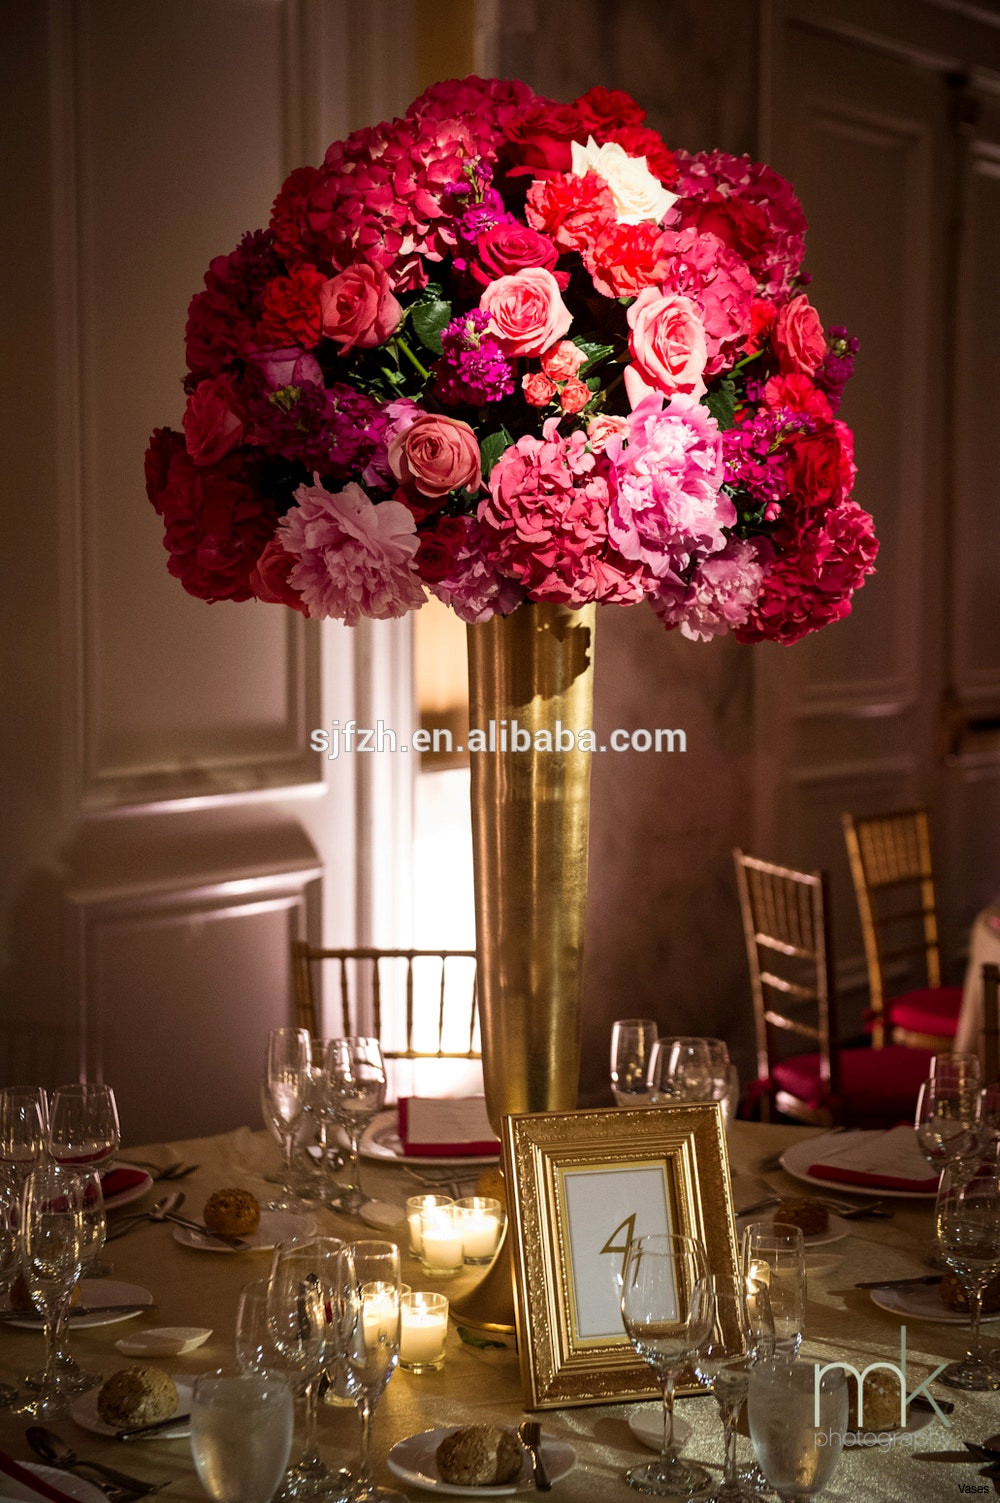 23 Stunning 8 Glass Vase 2024 free download 8 glass vase of gold wedding decorations fresh dsc7285h vases gold pedestal vase throughout gold wedding decorations best of decoration excellent picture accessories for wedding table using 